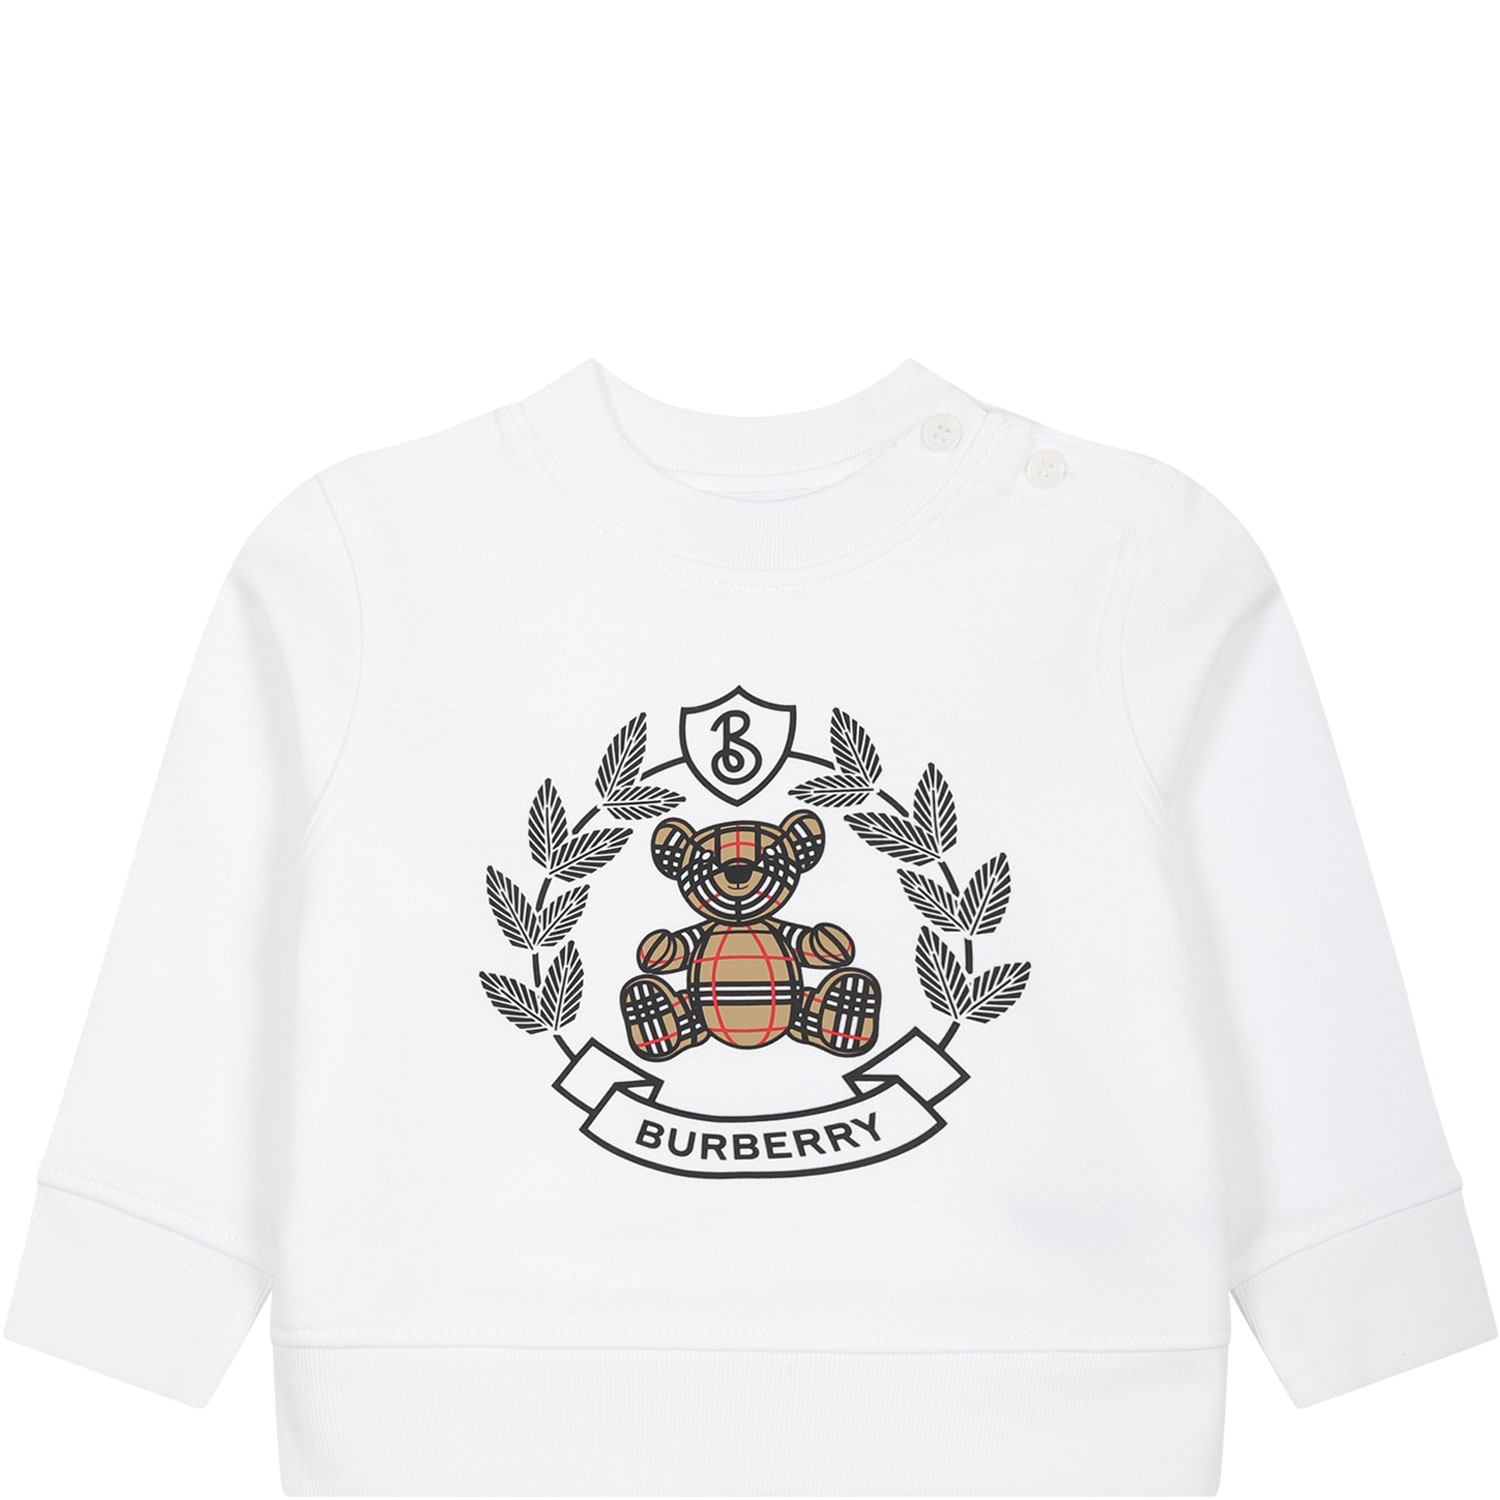 BURBERRY WHITE SWEATSHIRT FOR BABY KIDS WITH THOMAS BEAR AND LOGO